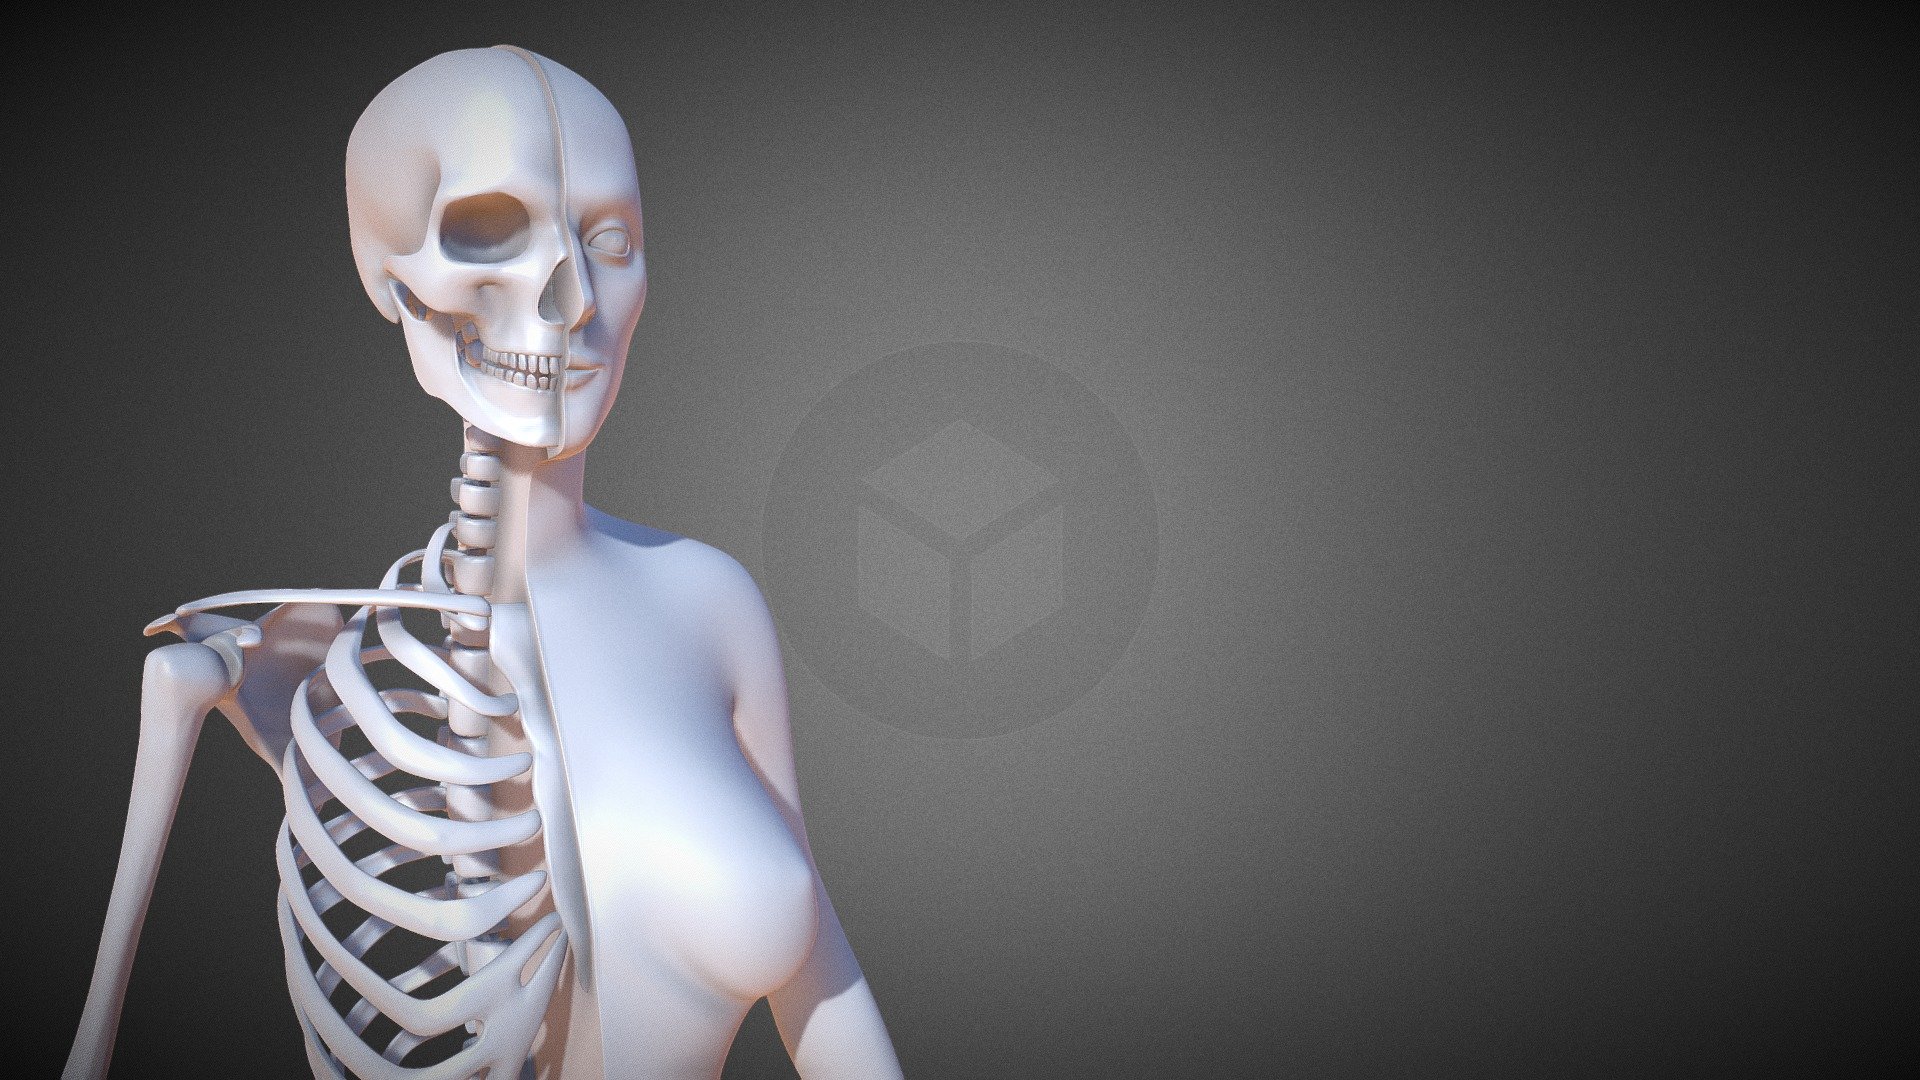 Female Skeleton Anatomy  3d print model ready to use

Print Size In inch

x 2.38 inch

y 5.00 inch

z 2.38 inch

Polycount

Vertex 872030 Face 1746493

File format

ZTL Obj Fbx Stl

We greatly appreciate you choosing our 3D models and hope they will be of use. We look forward to continuously dealing with you.

If you like this collection don't forget to rate it please - Enjoy

Hope you like it! - Female Skeleton Anatomy 3D Print - Buy Royalty Free 3D model by Mikle (@cgamit786) 3d model